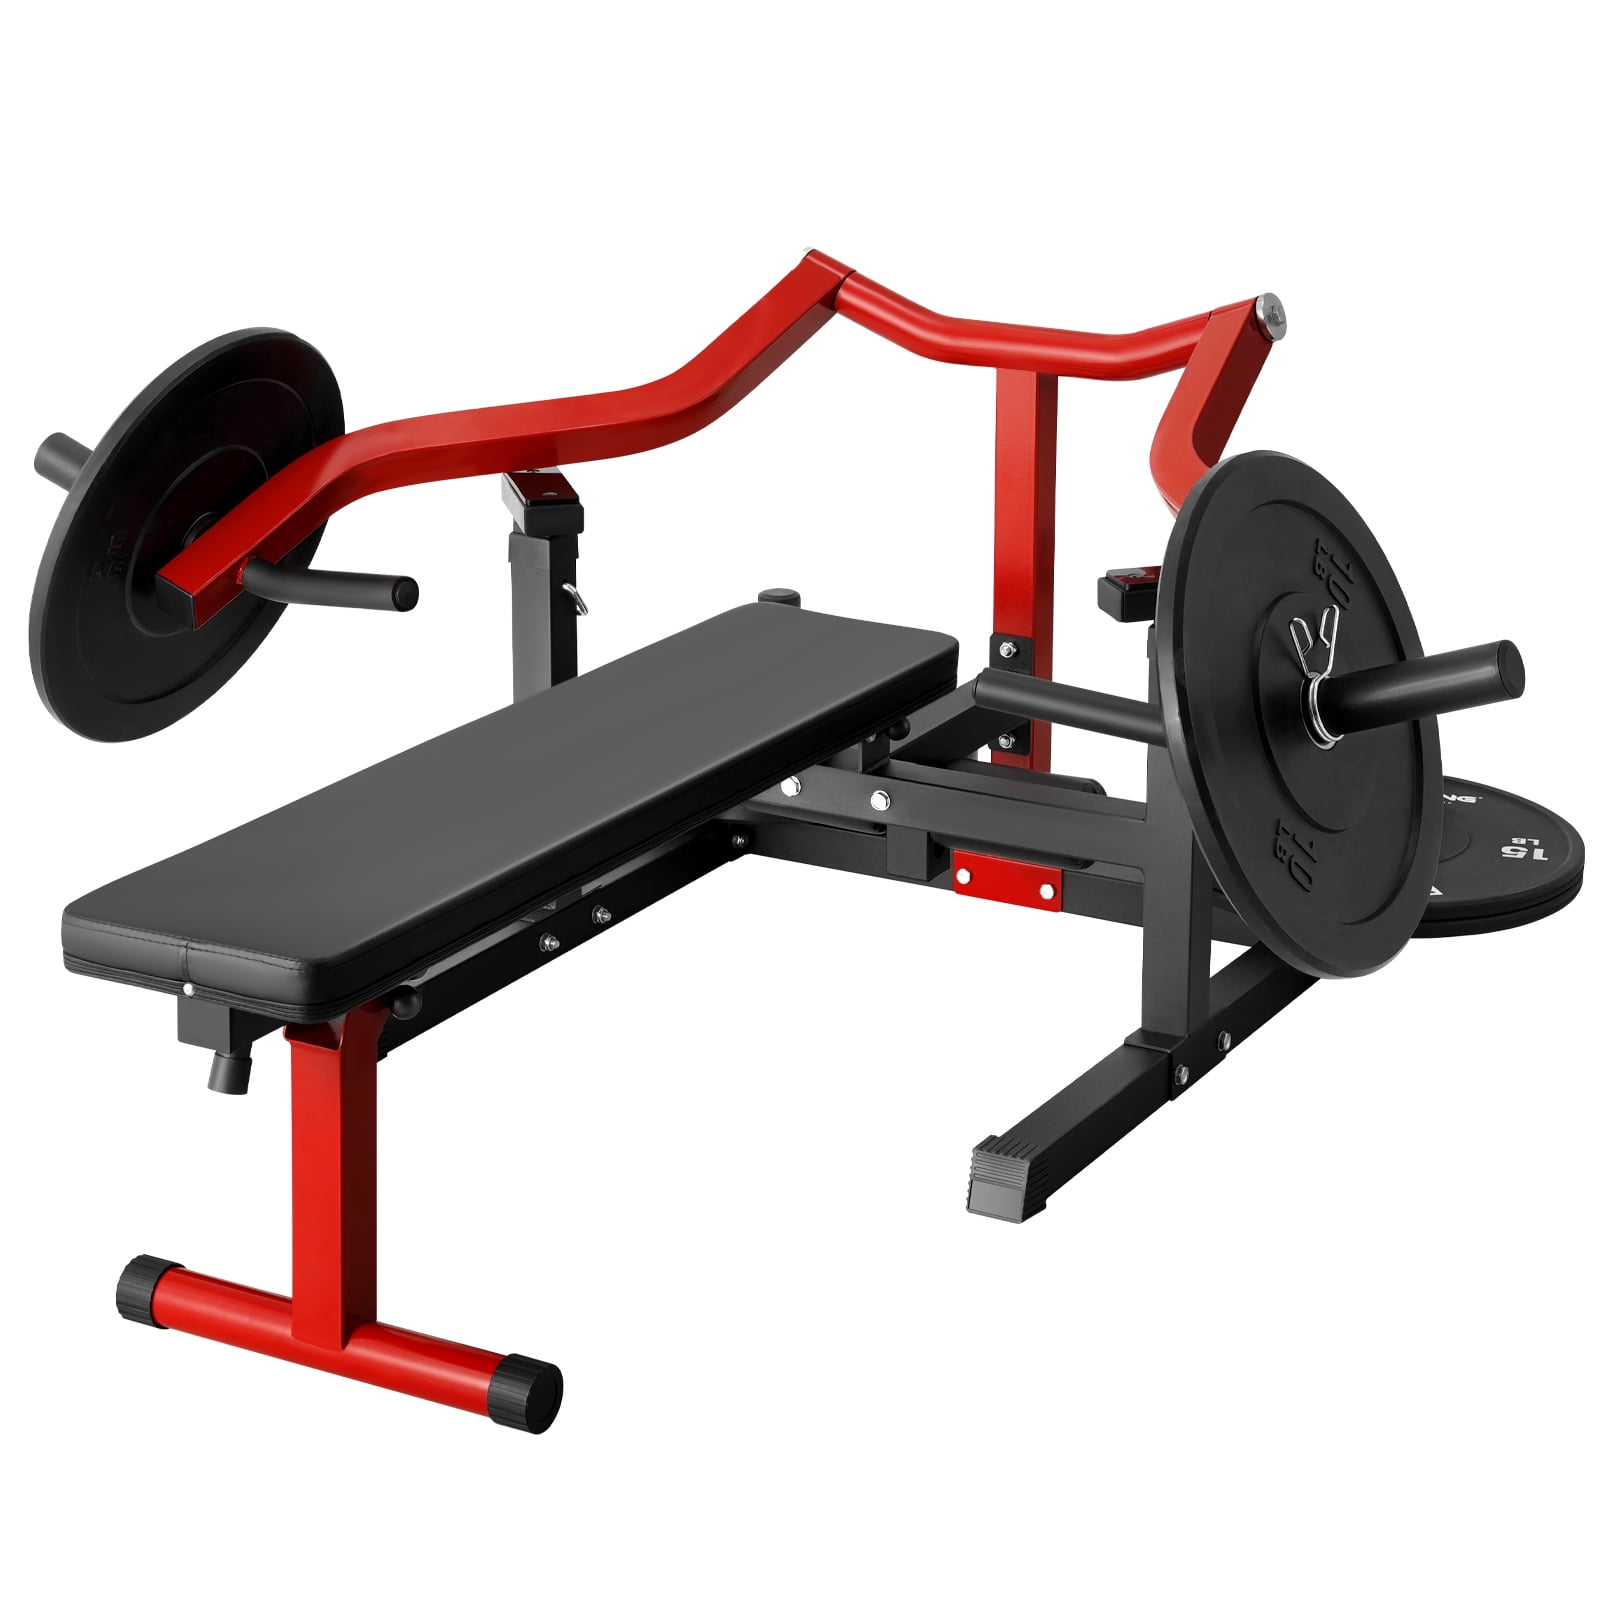 Syedee Chest Press Machine, 1250LBS Capacity with Independent